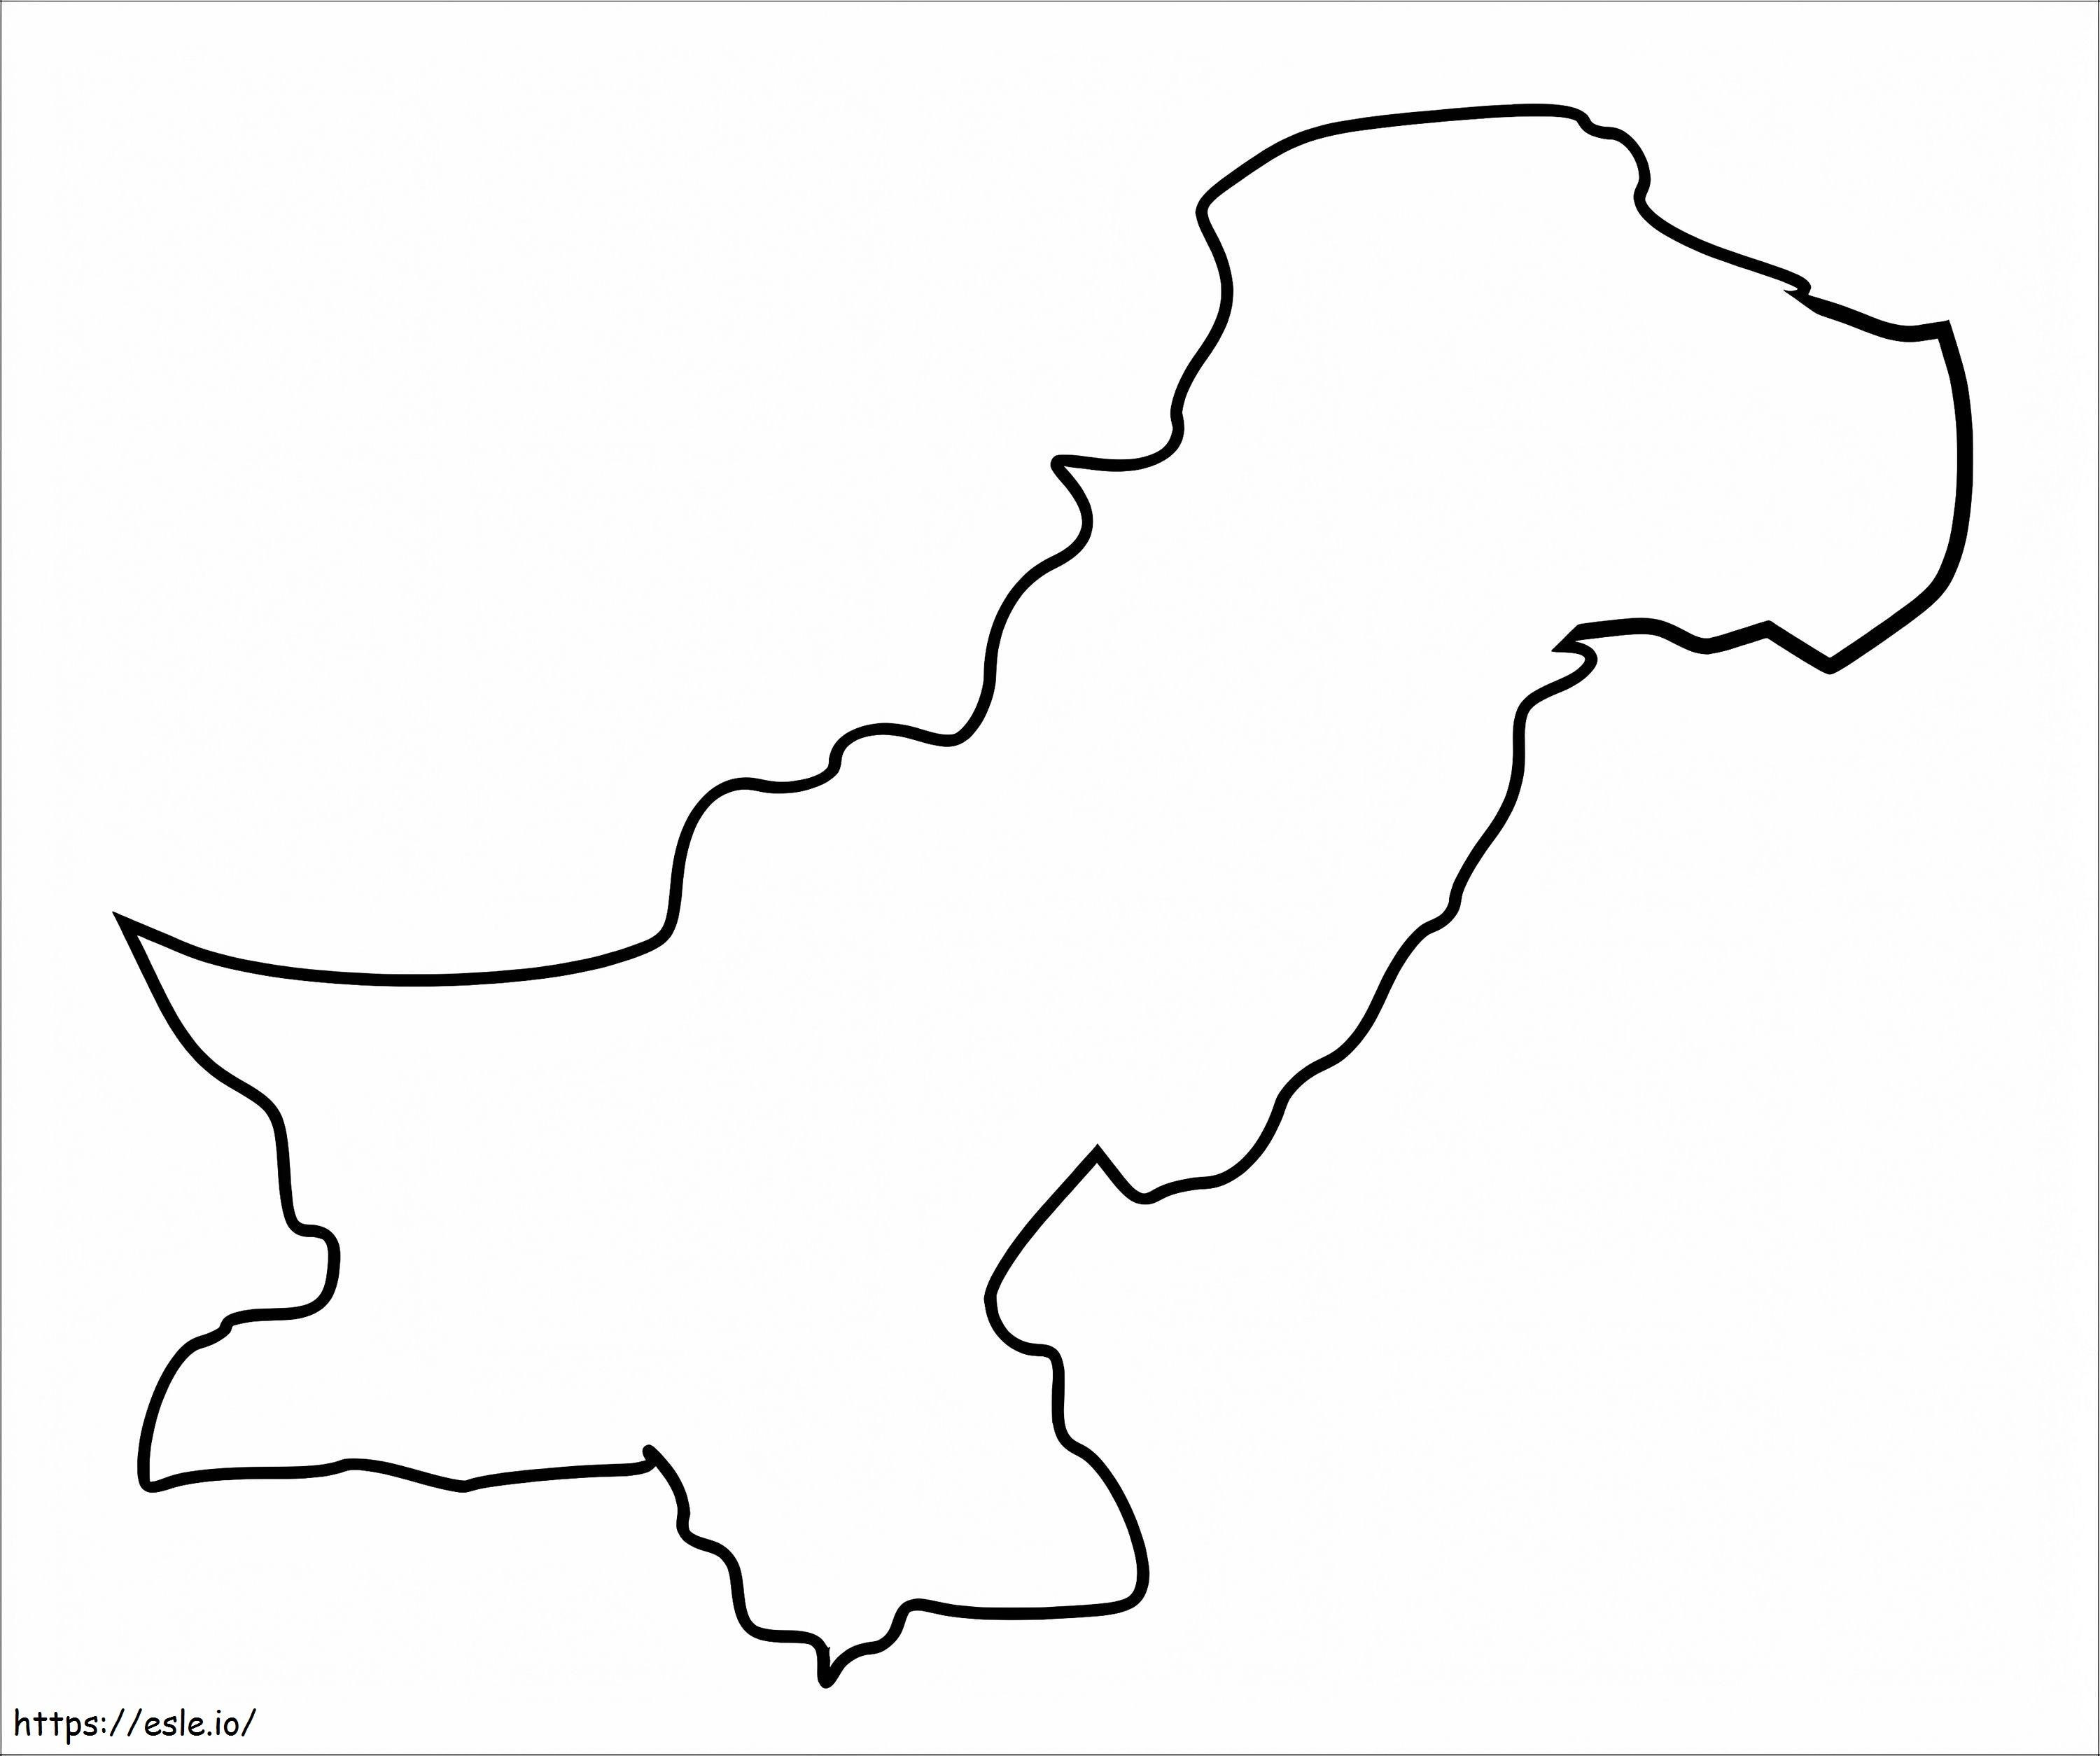 Pakistan Map Outline coloring page